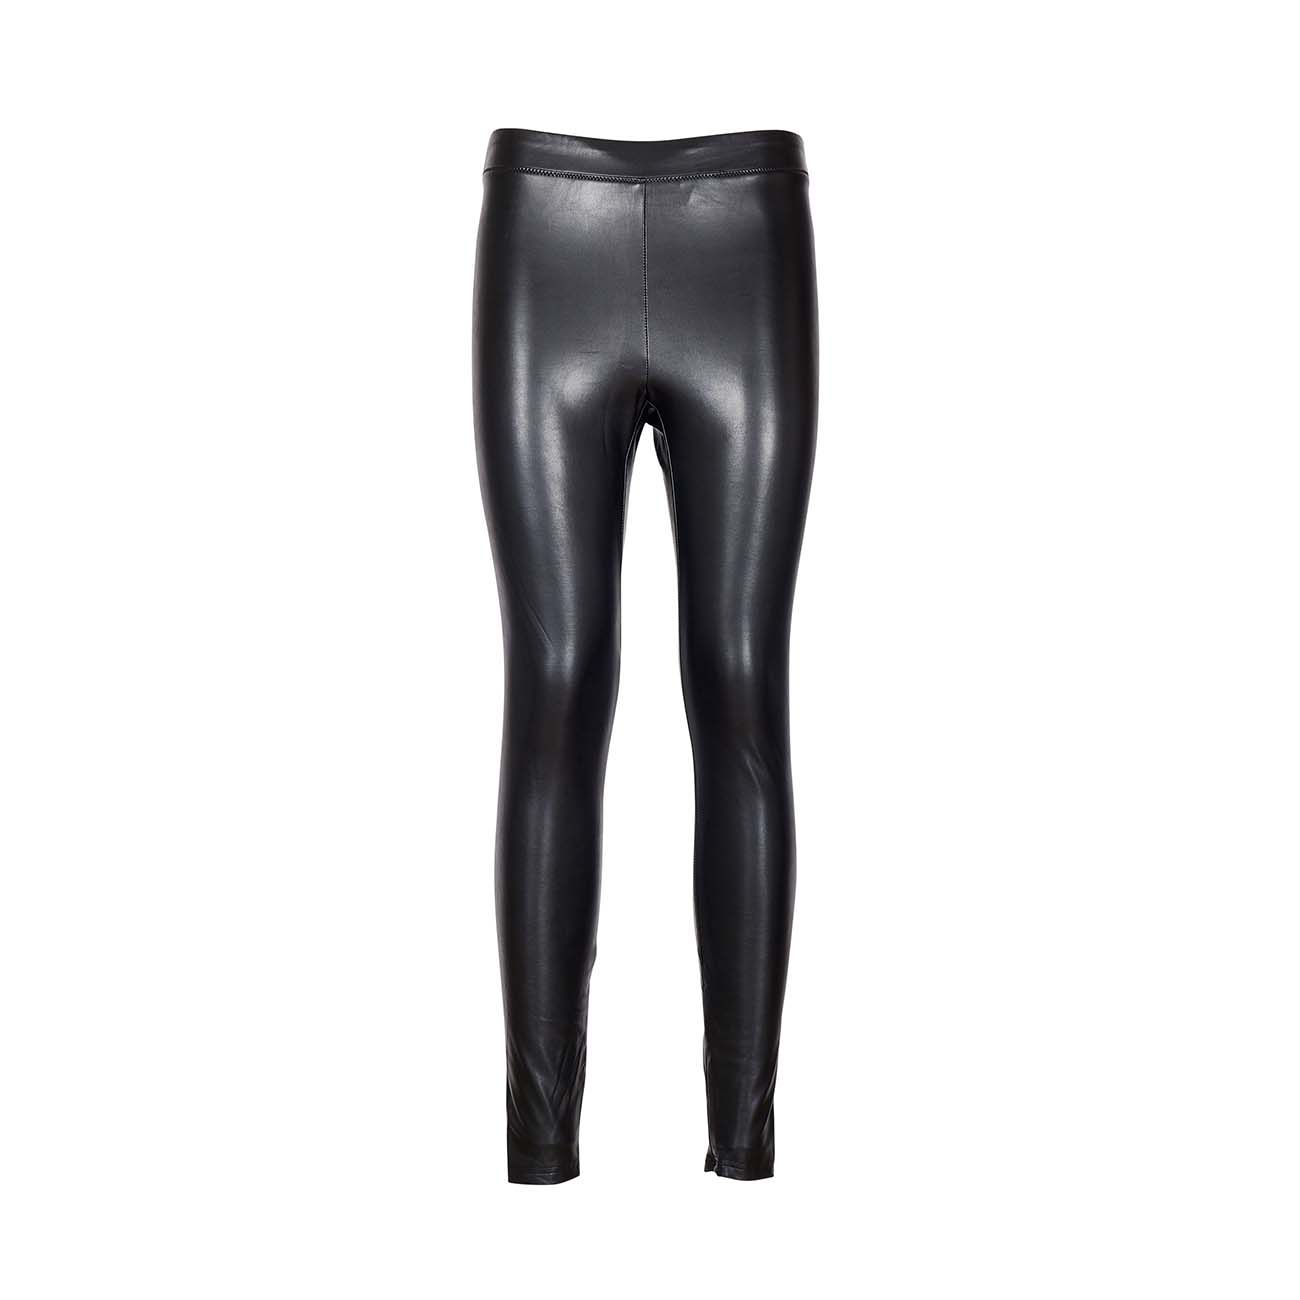 STRETCH FAUX LEATHER LEGGINGS WITH ZIP Woman Black 2012402891832